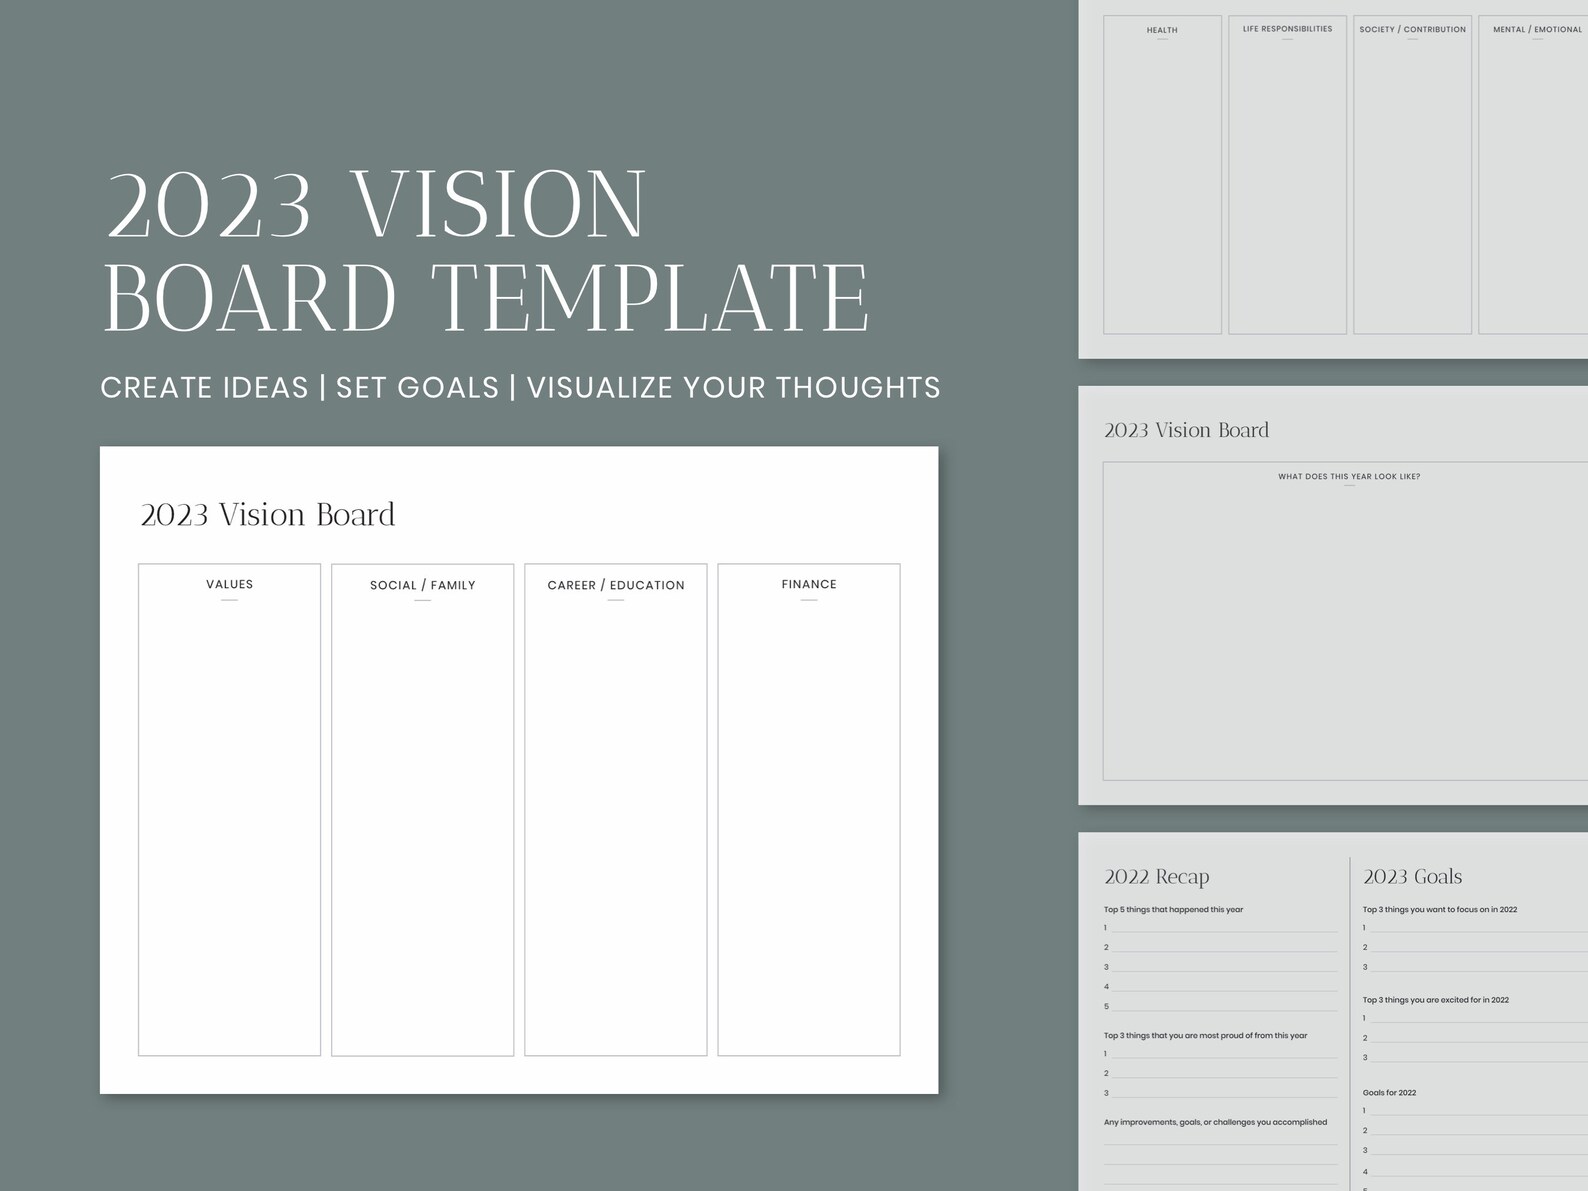 2023 Vision Board Template 2023 Goal Setting (Instant Download) - Etsy